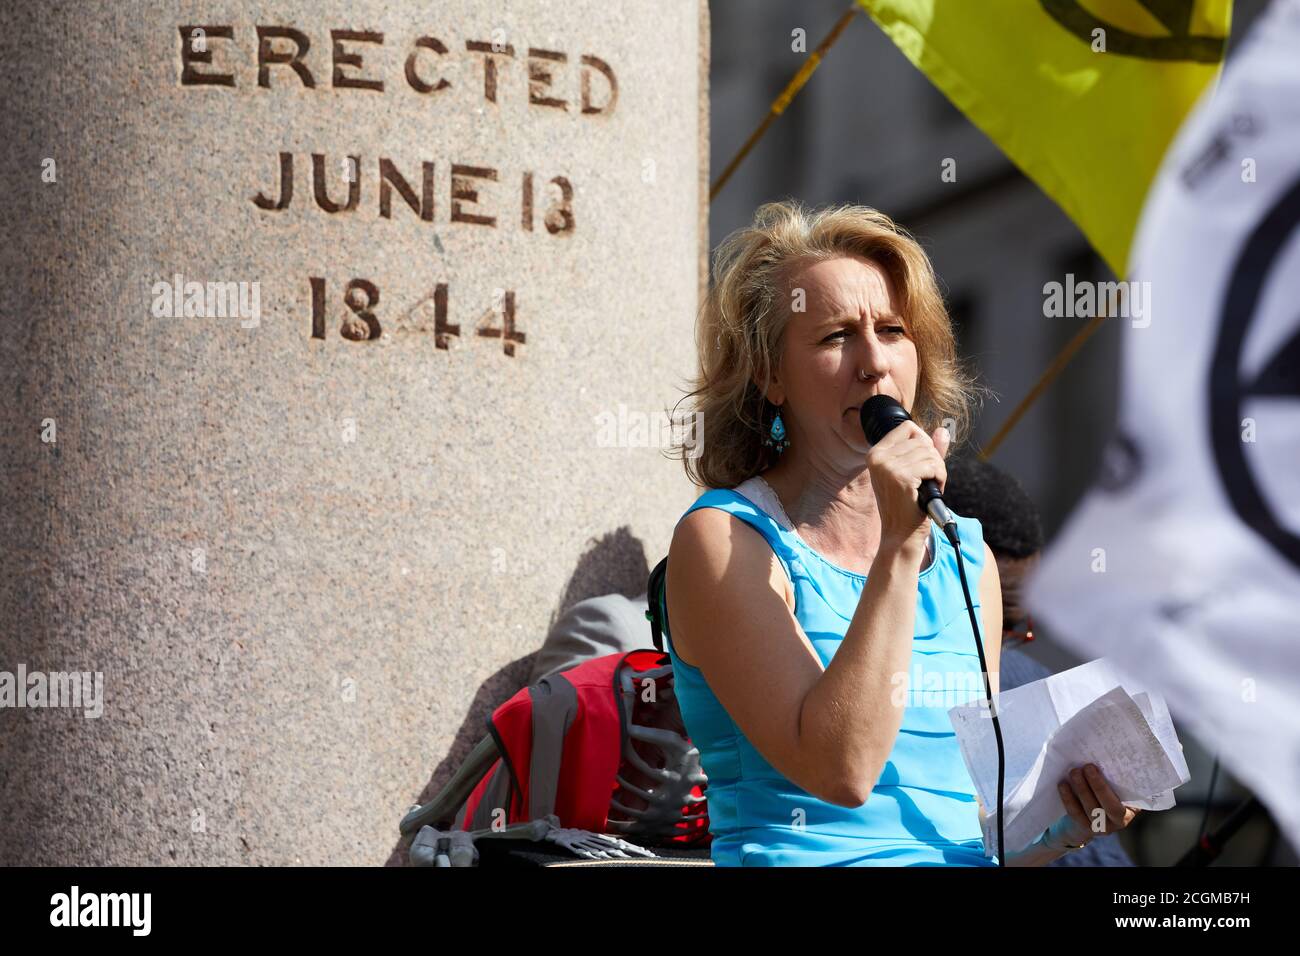 London, UK. - 10 Sept 2020: Gail Bradbrook, Extinction Rebellion co-founder, speaking at a protest by the group at Bank in the City of London. Stock Photo